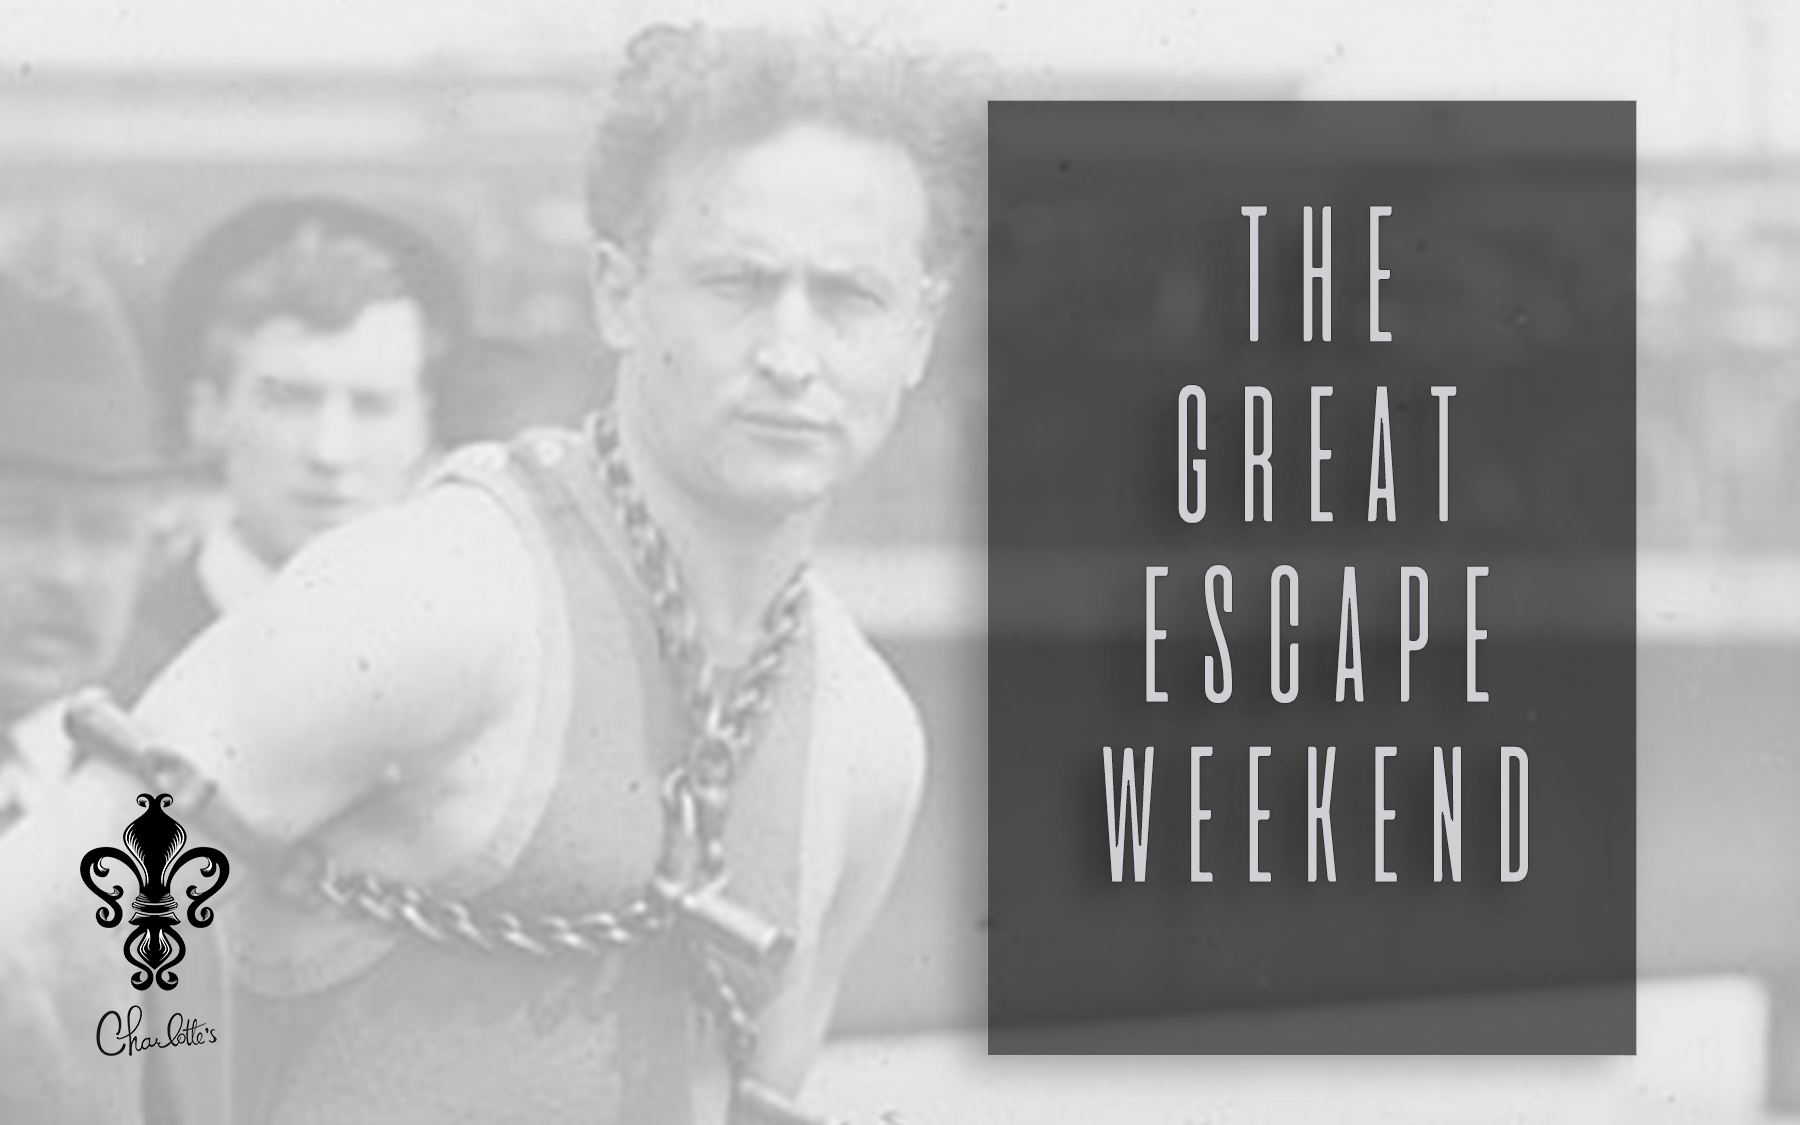 The Great Escape Weekend